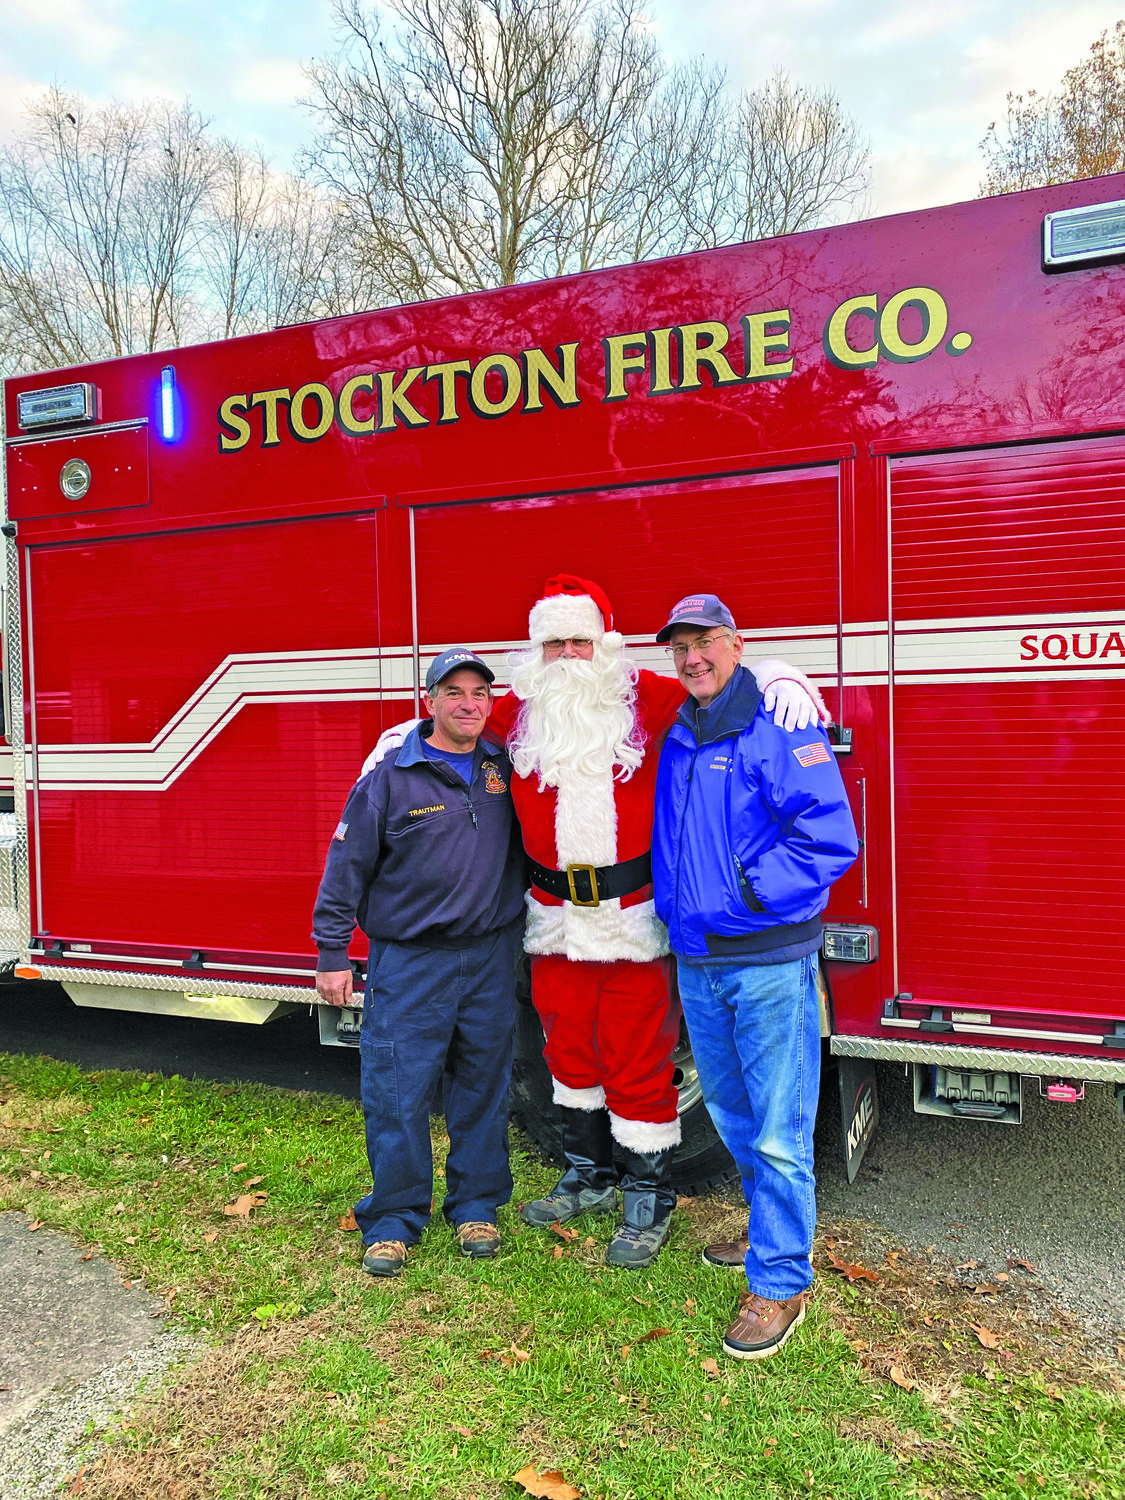 With a Stockton Fire Co. truck are Eric Trautman, Rick McDaniel as Santa, and Karl Darby.